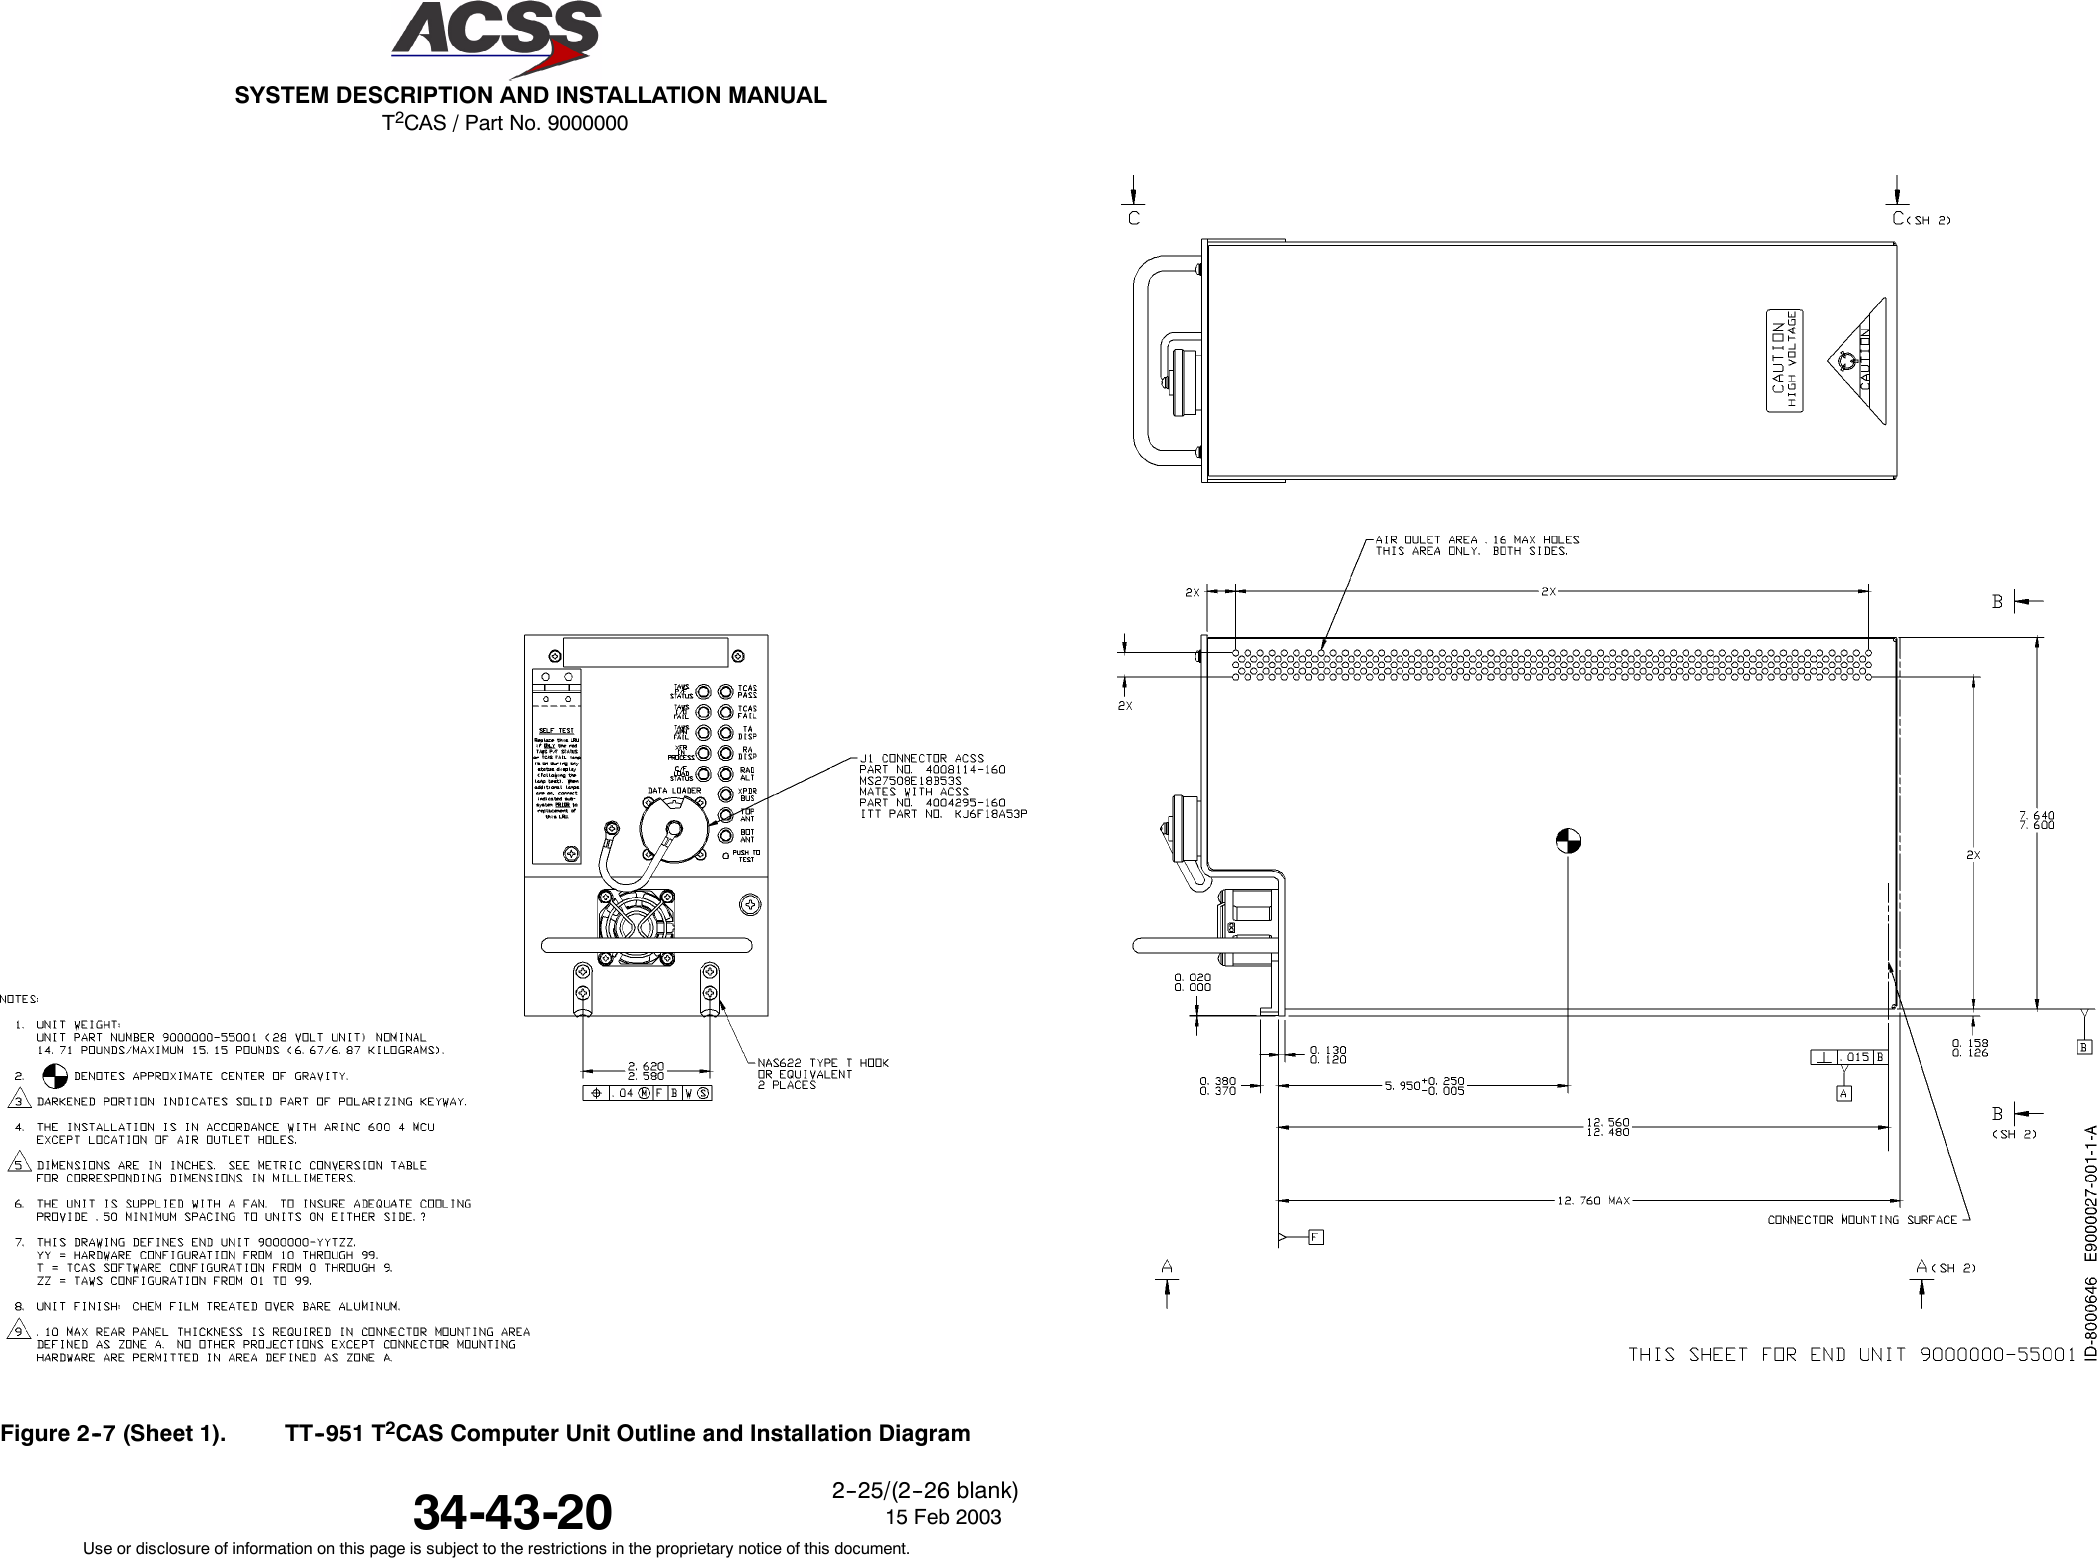 T2CAS / Part No. 9000000SYSTEM DESCRIPTION AND INSTALLATION MANUAL34-43-20 15 Feb 2003Use or disclosure of information on this page is subject to the restrictions in the proprietary notice of this document.2--25/(2--26 blank)Figure 2--7 (Sheet 1). TT--951 T2CAS Computer Unit Outline and Installation Diagram